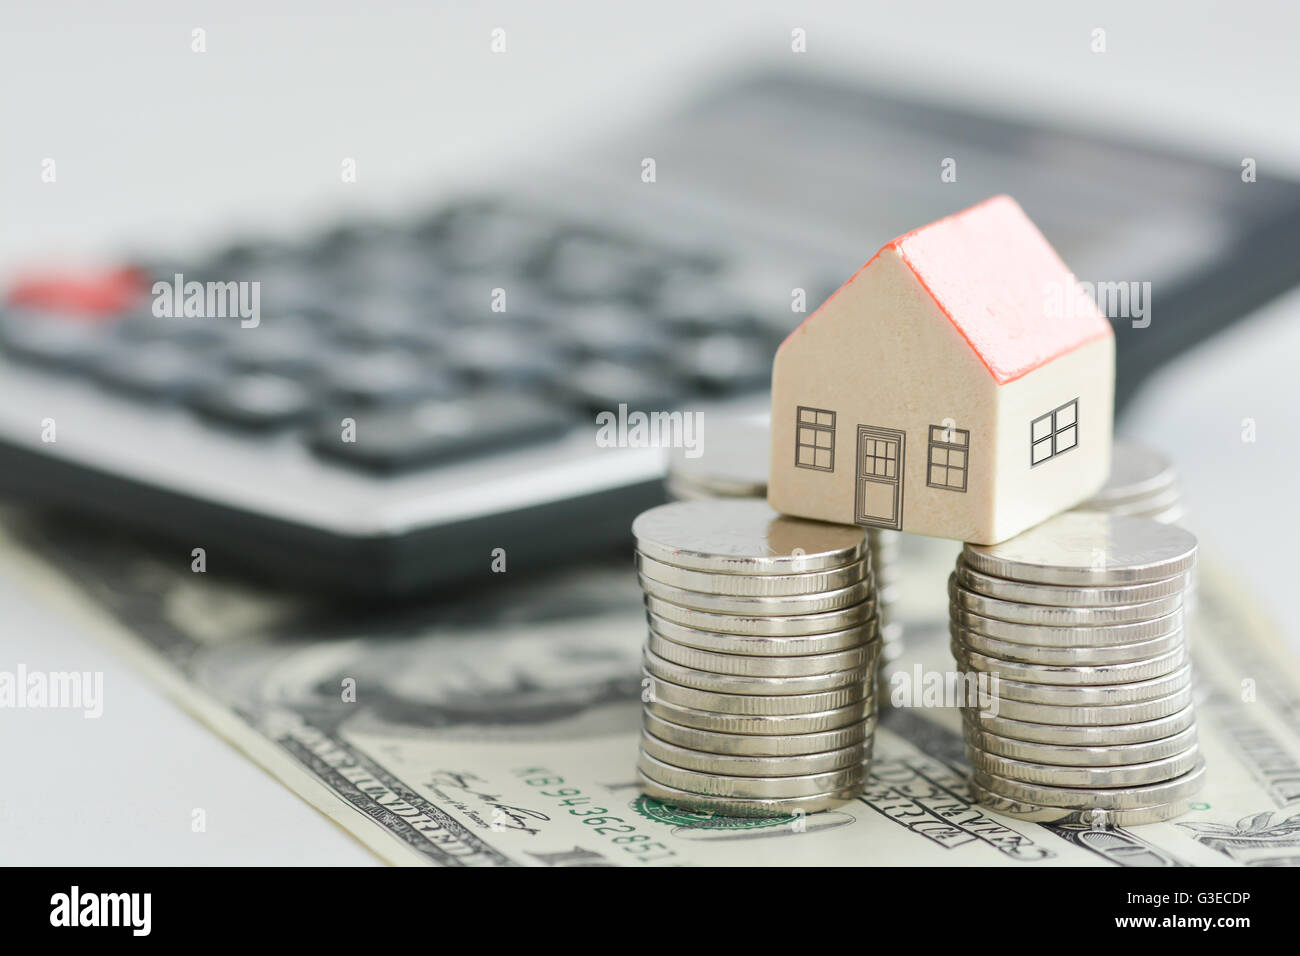 House ownership concept – a model house on a pile of coins Stock Photo